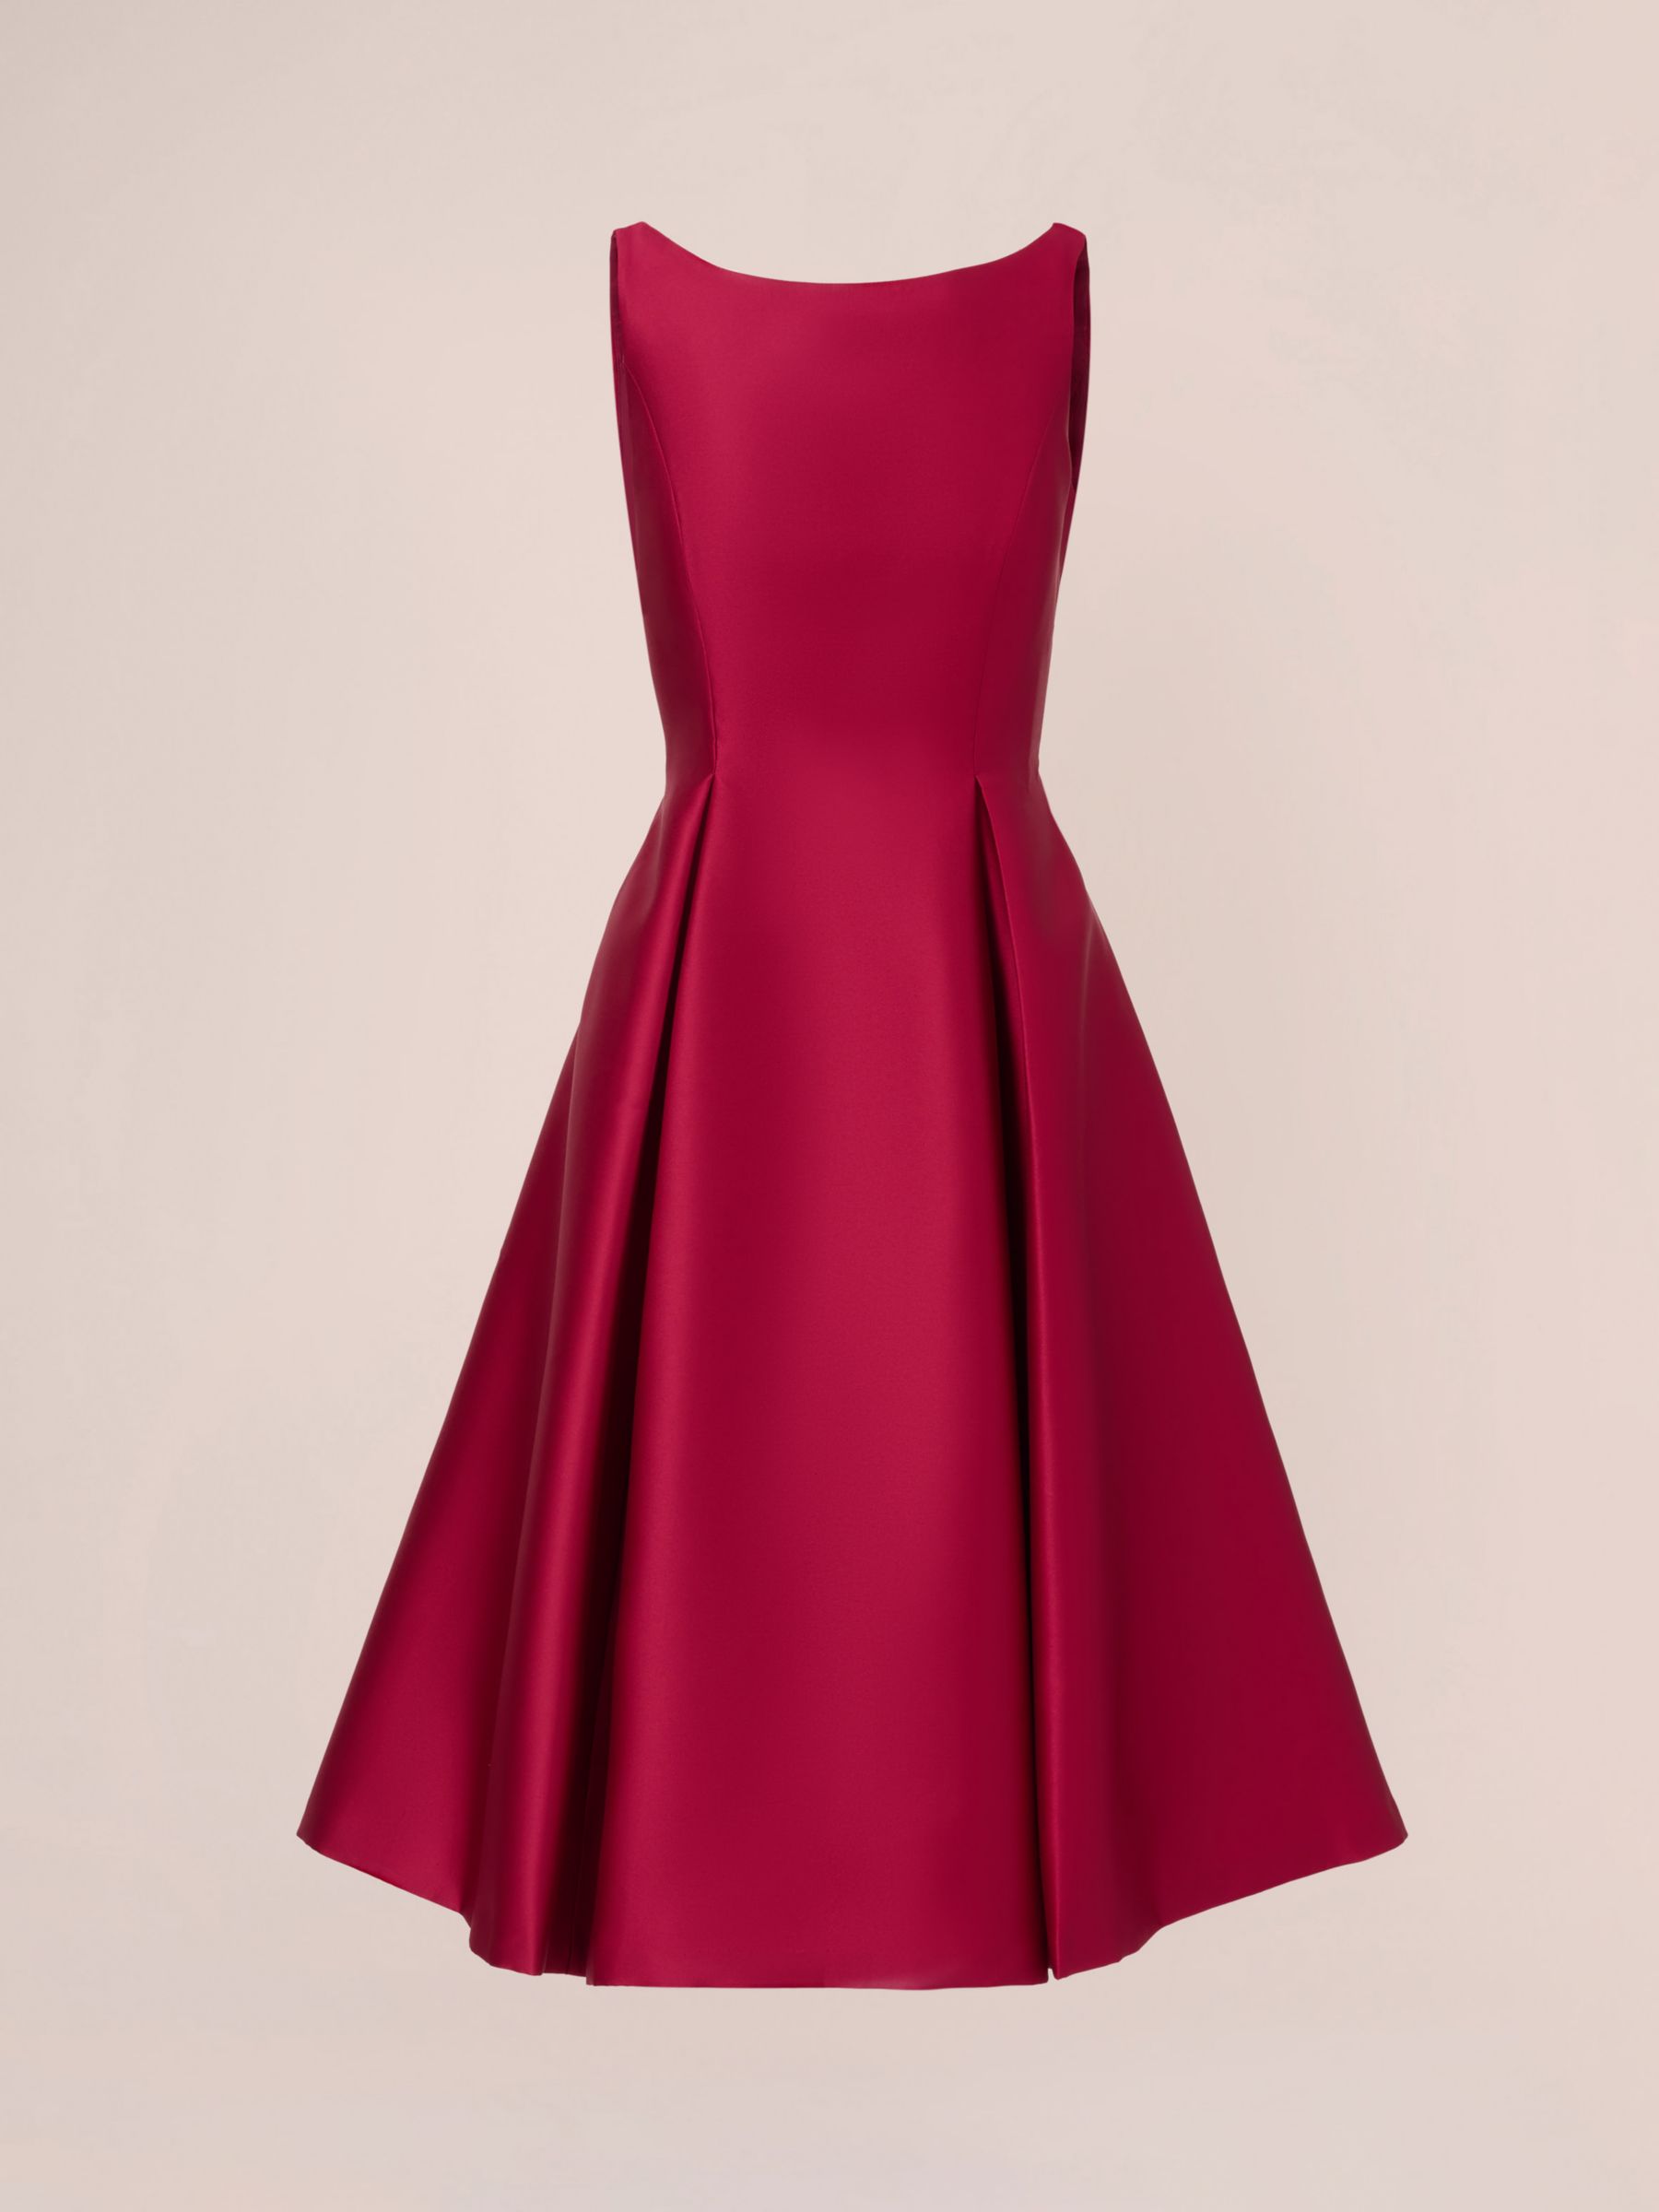 Adrianna Papell Sleeveless Cocktail Dress, Red Plum at John Lewis ...